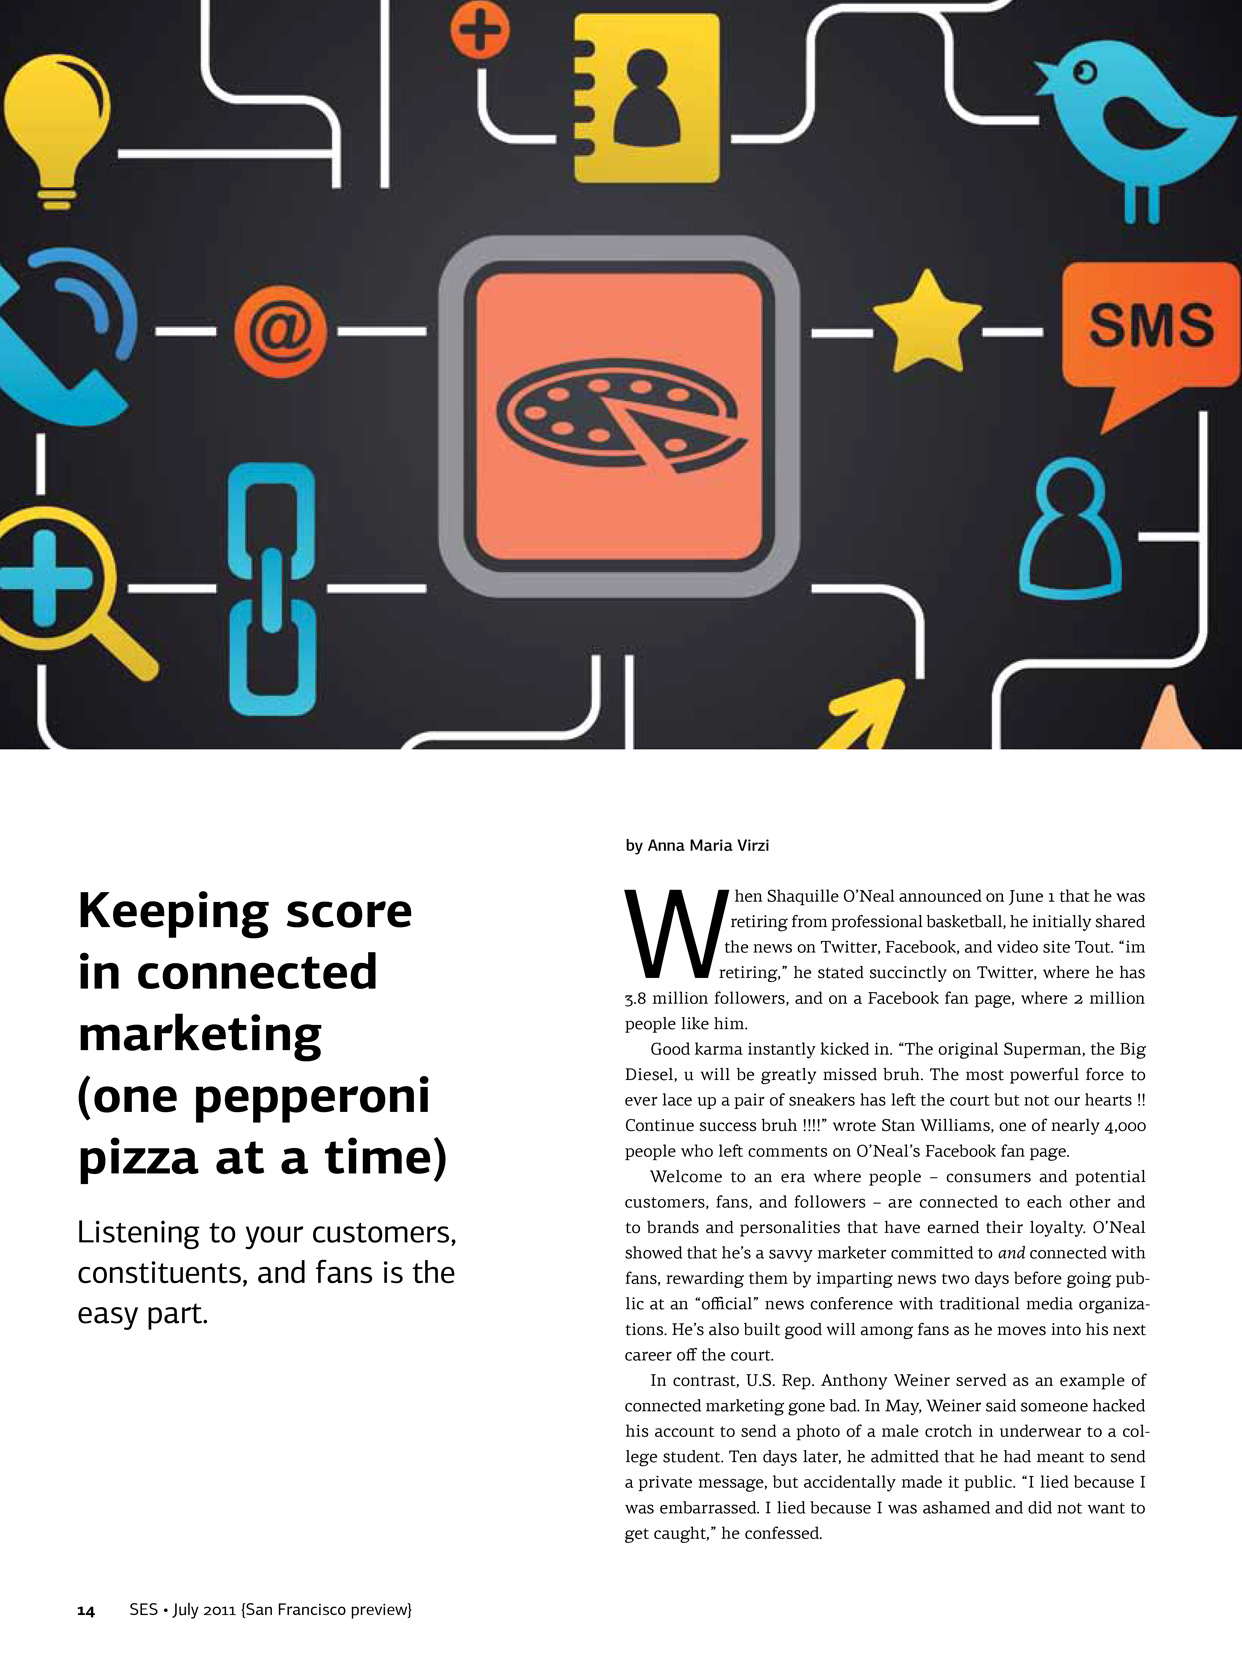 The first page of a feature article from SES Magazine that shows my redesign. The article is titled 'Keeping Score in Connected Marketing (Once Pepperoni Pizza at a Time). It shows vector art of a pizza and of icons having to do with marketing and social media.